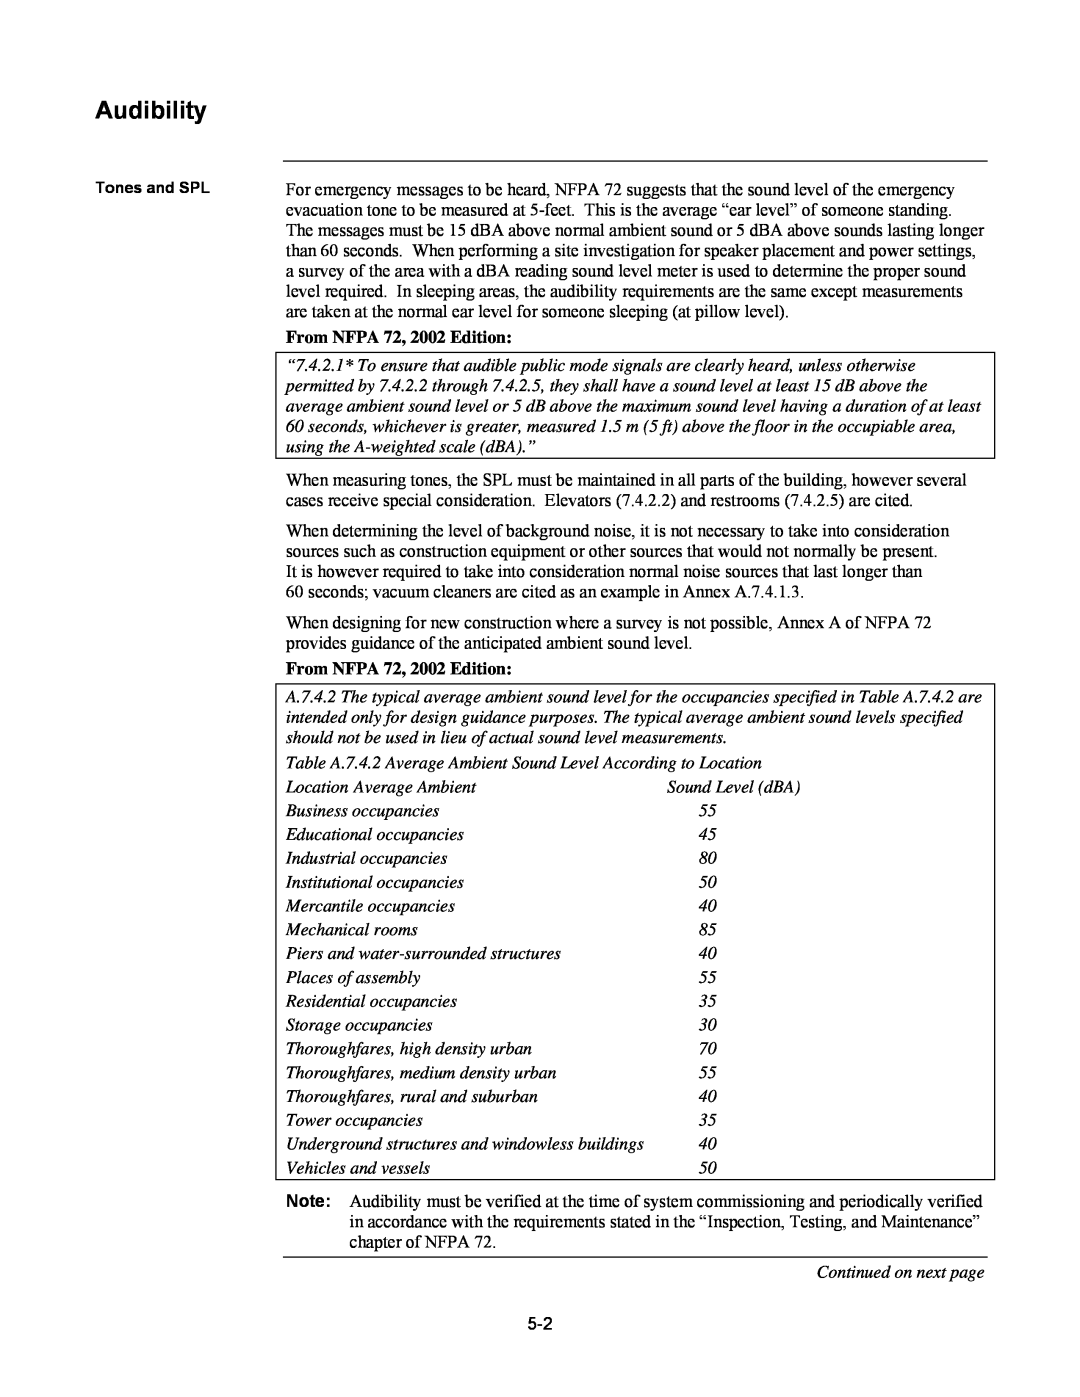 Tyco 579-769 specifications Audibility, From NFPA 72, 2002 Edition 